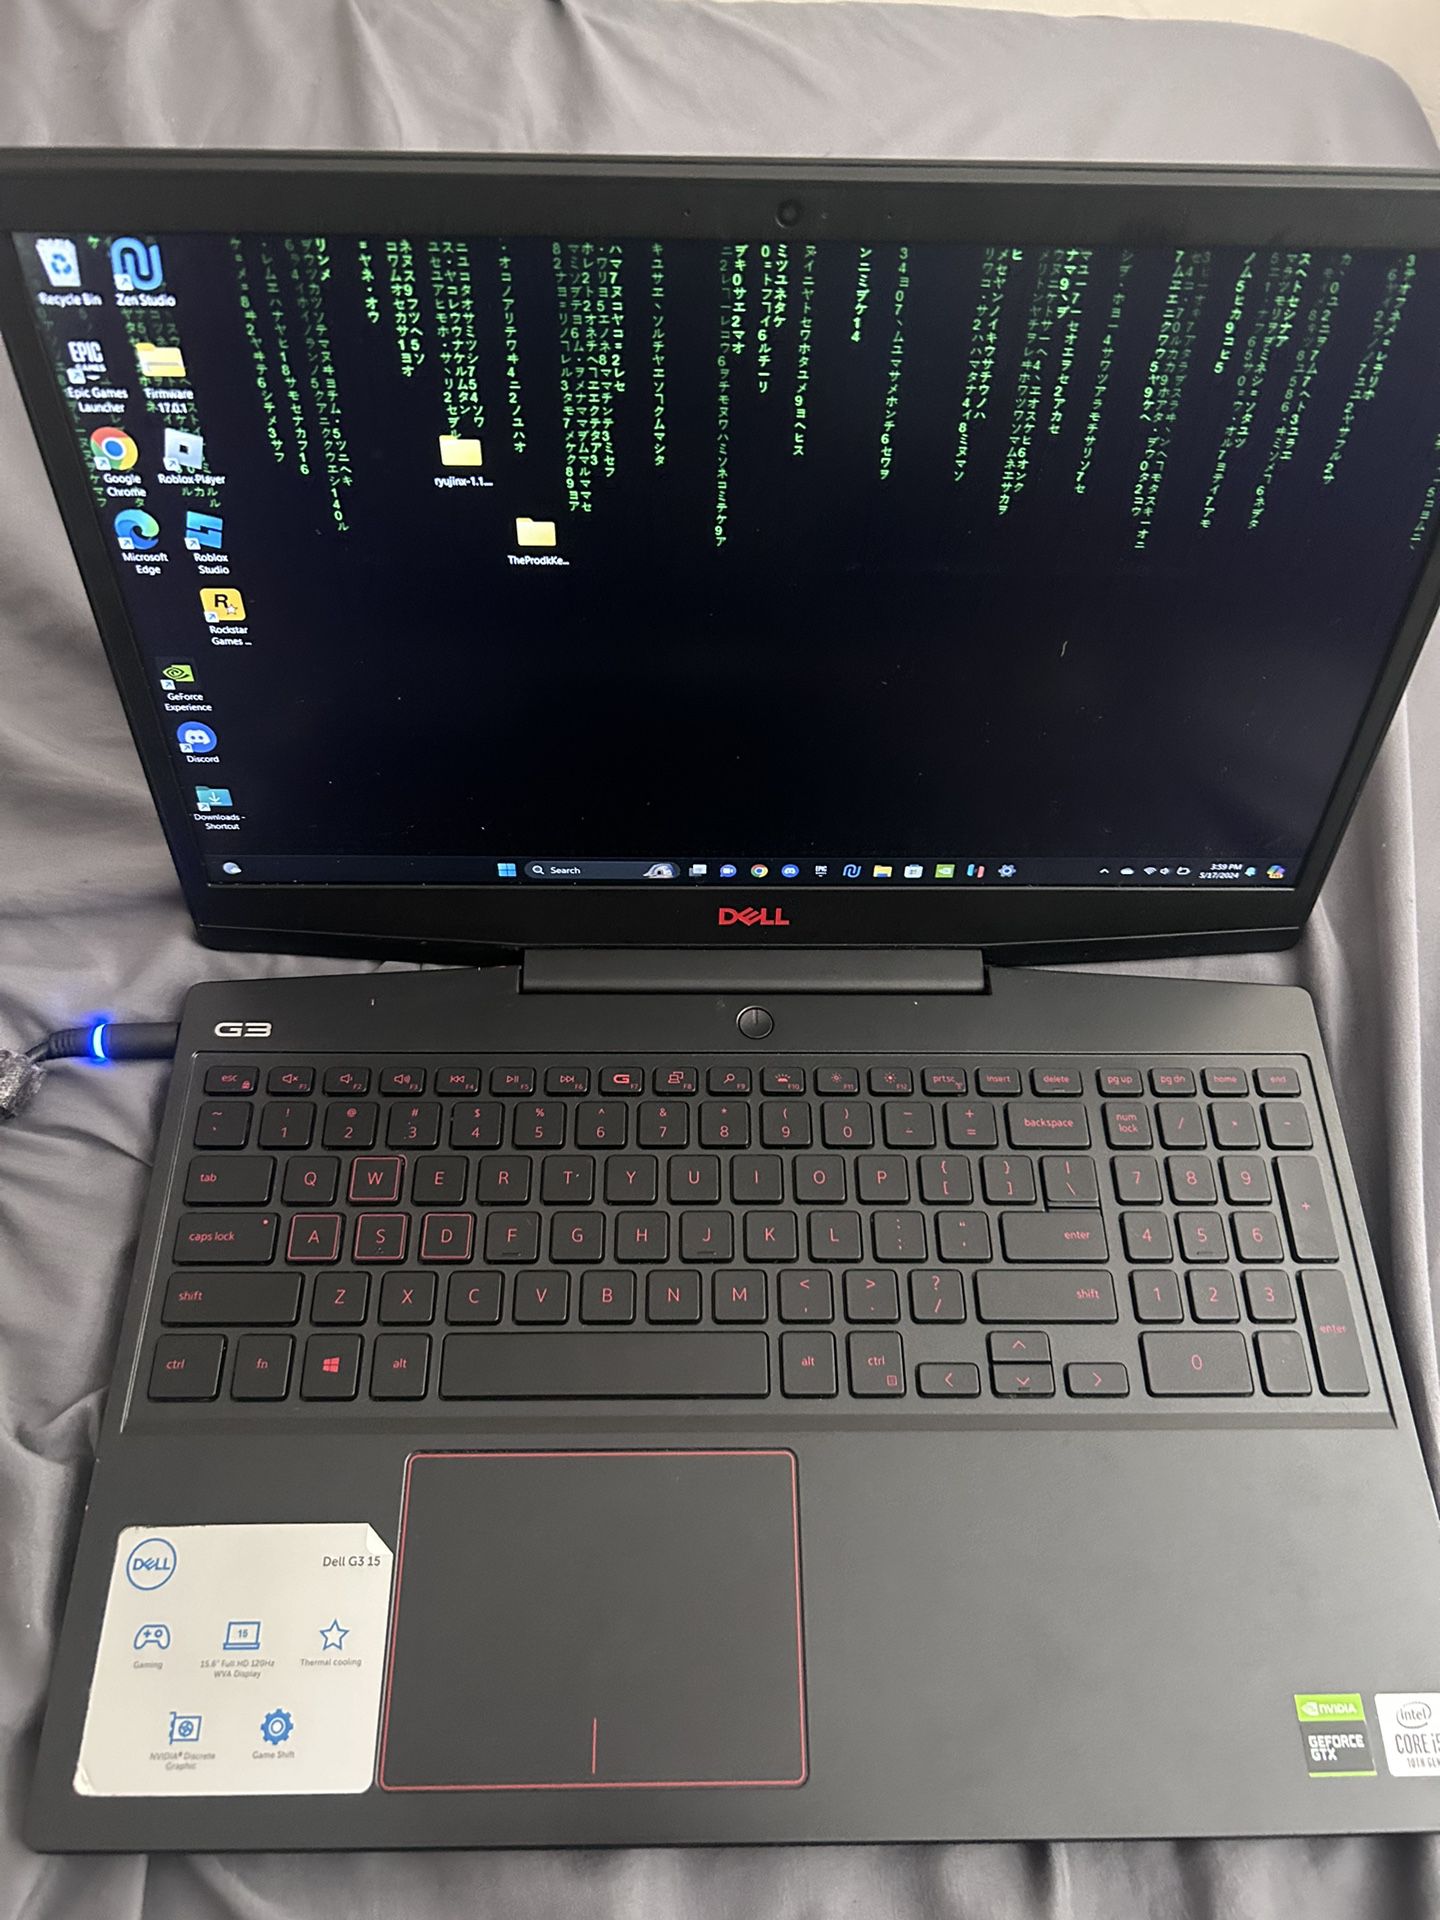 Dell G3 1500 Gaming laptop